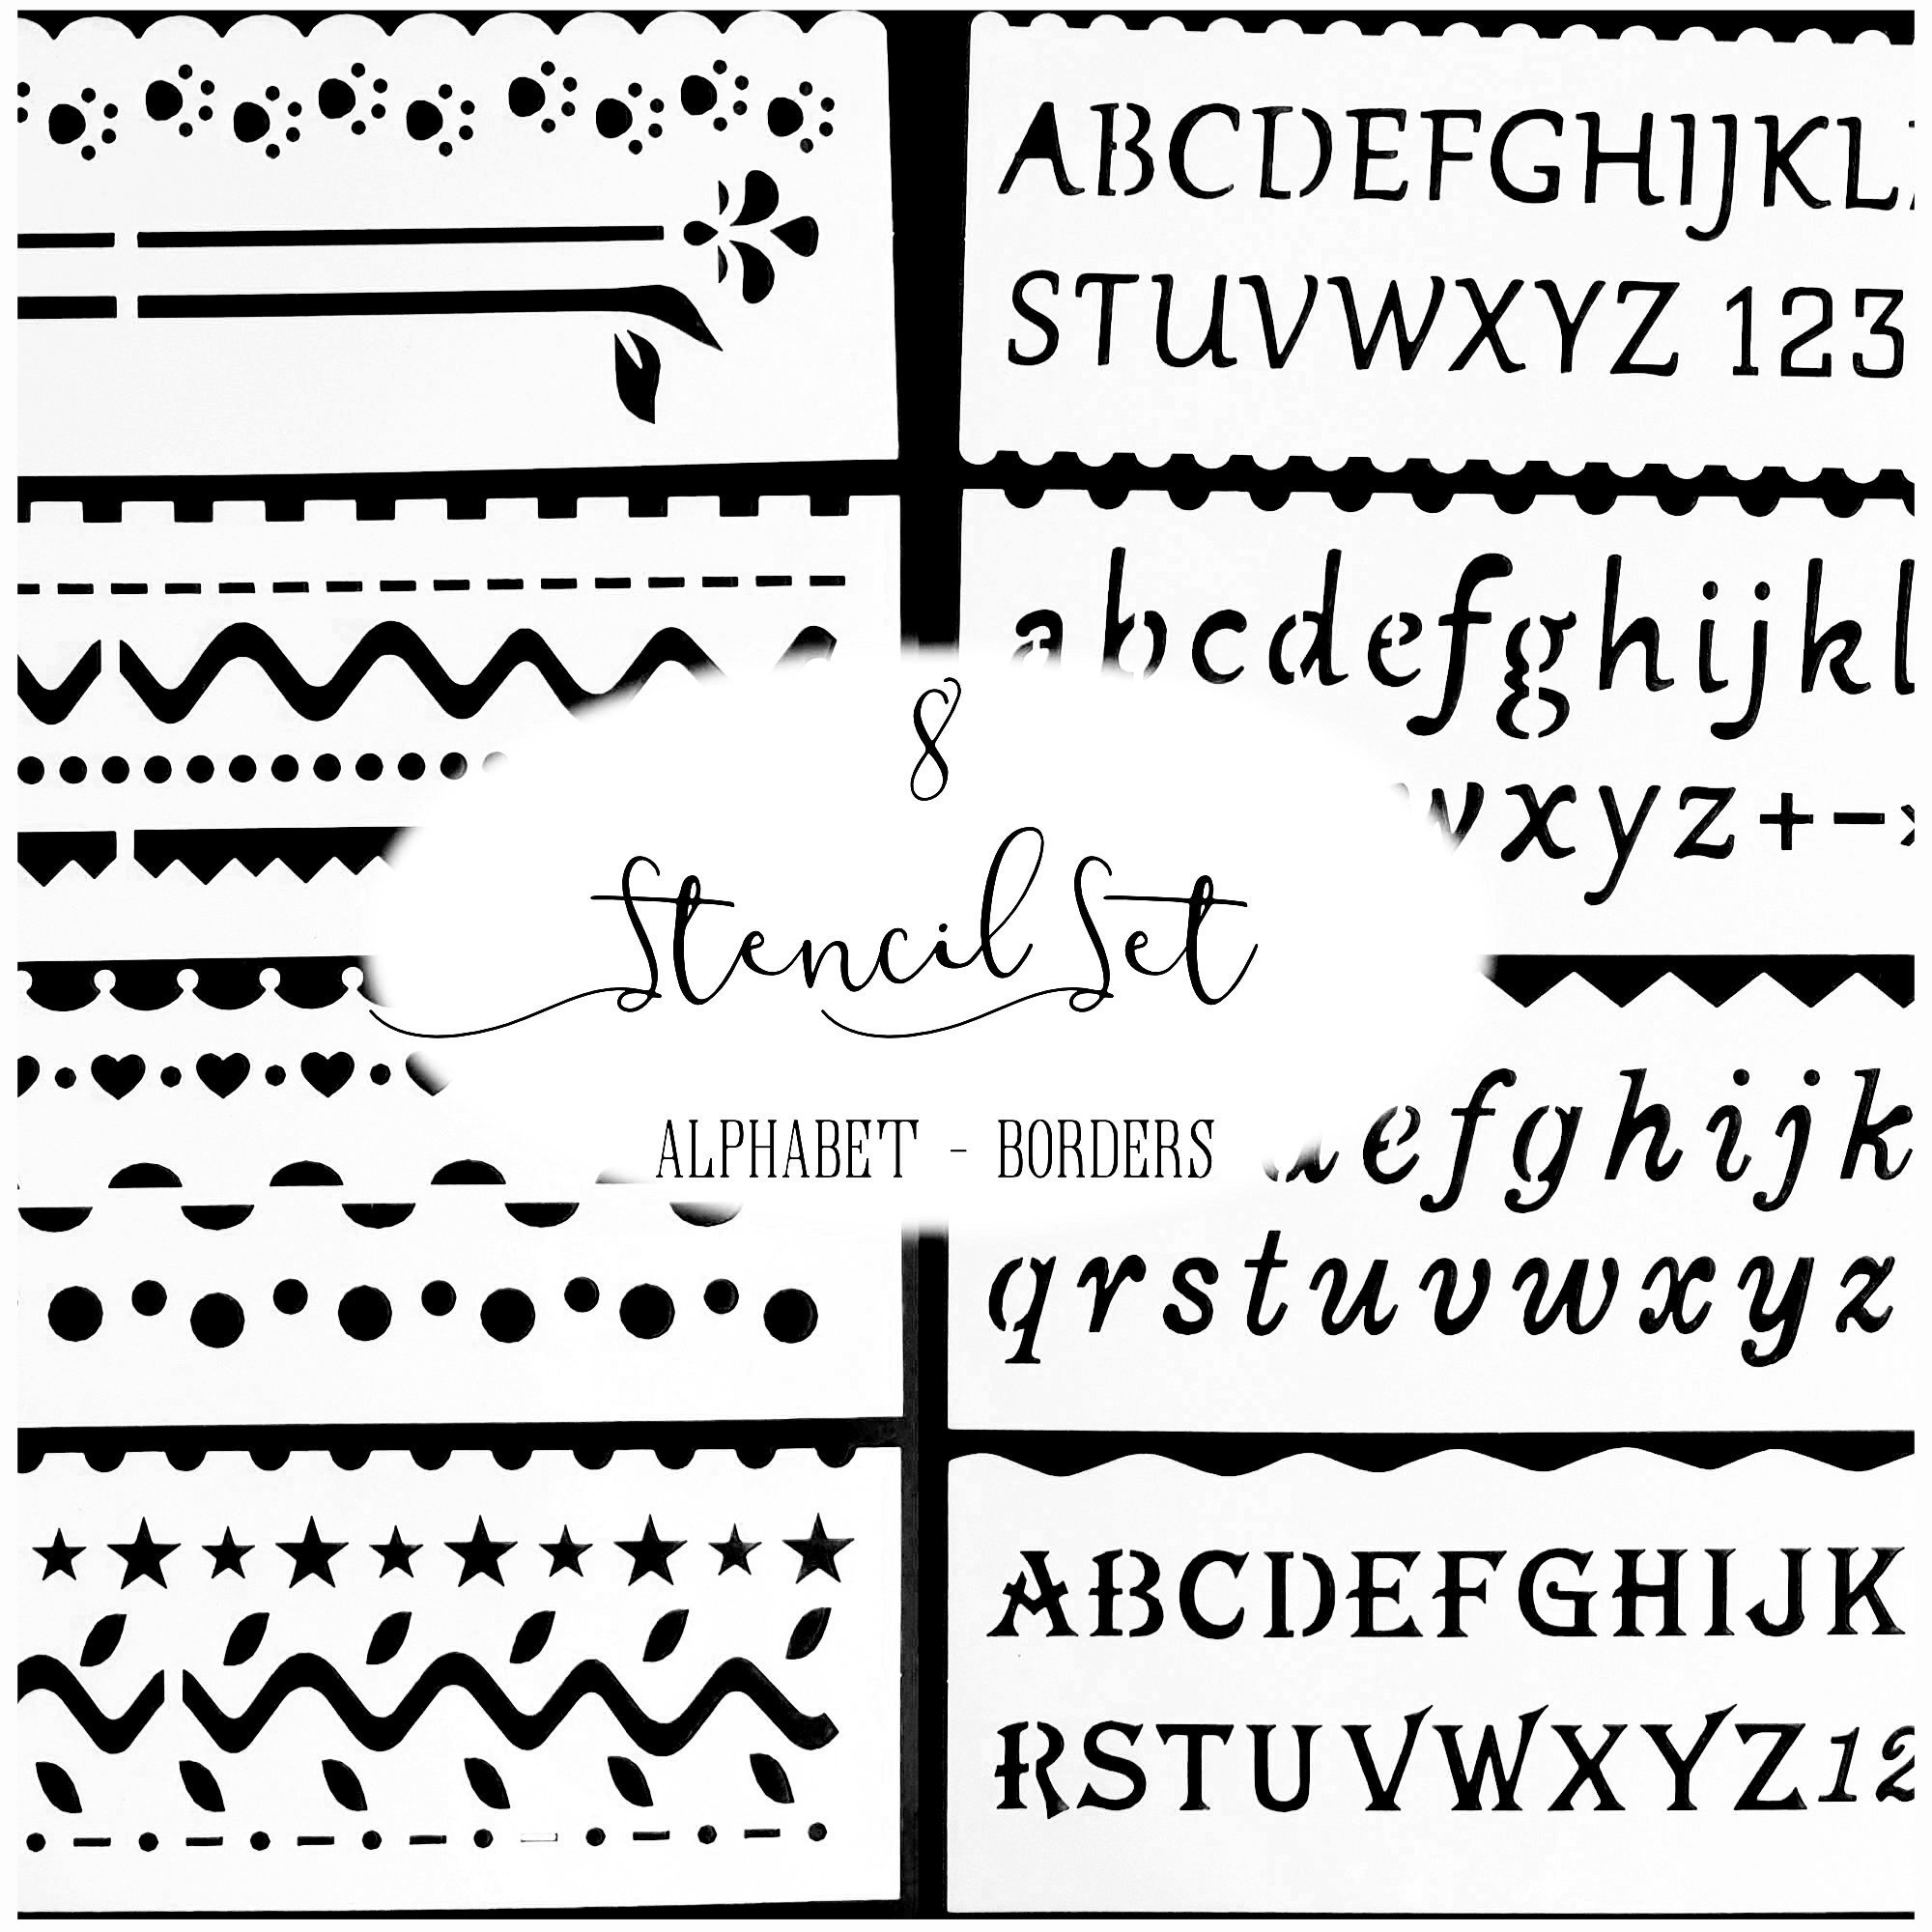 Bullet Journal Essential- Typewriter Font with ruler Stencil